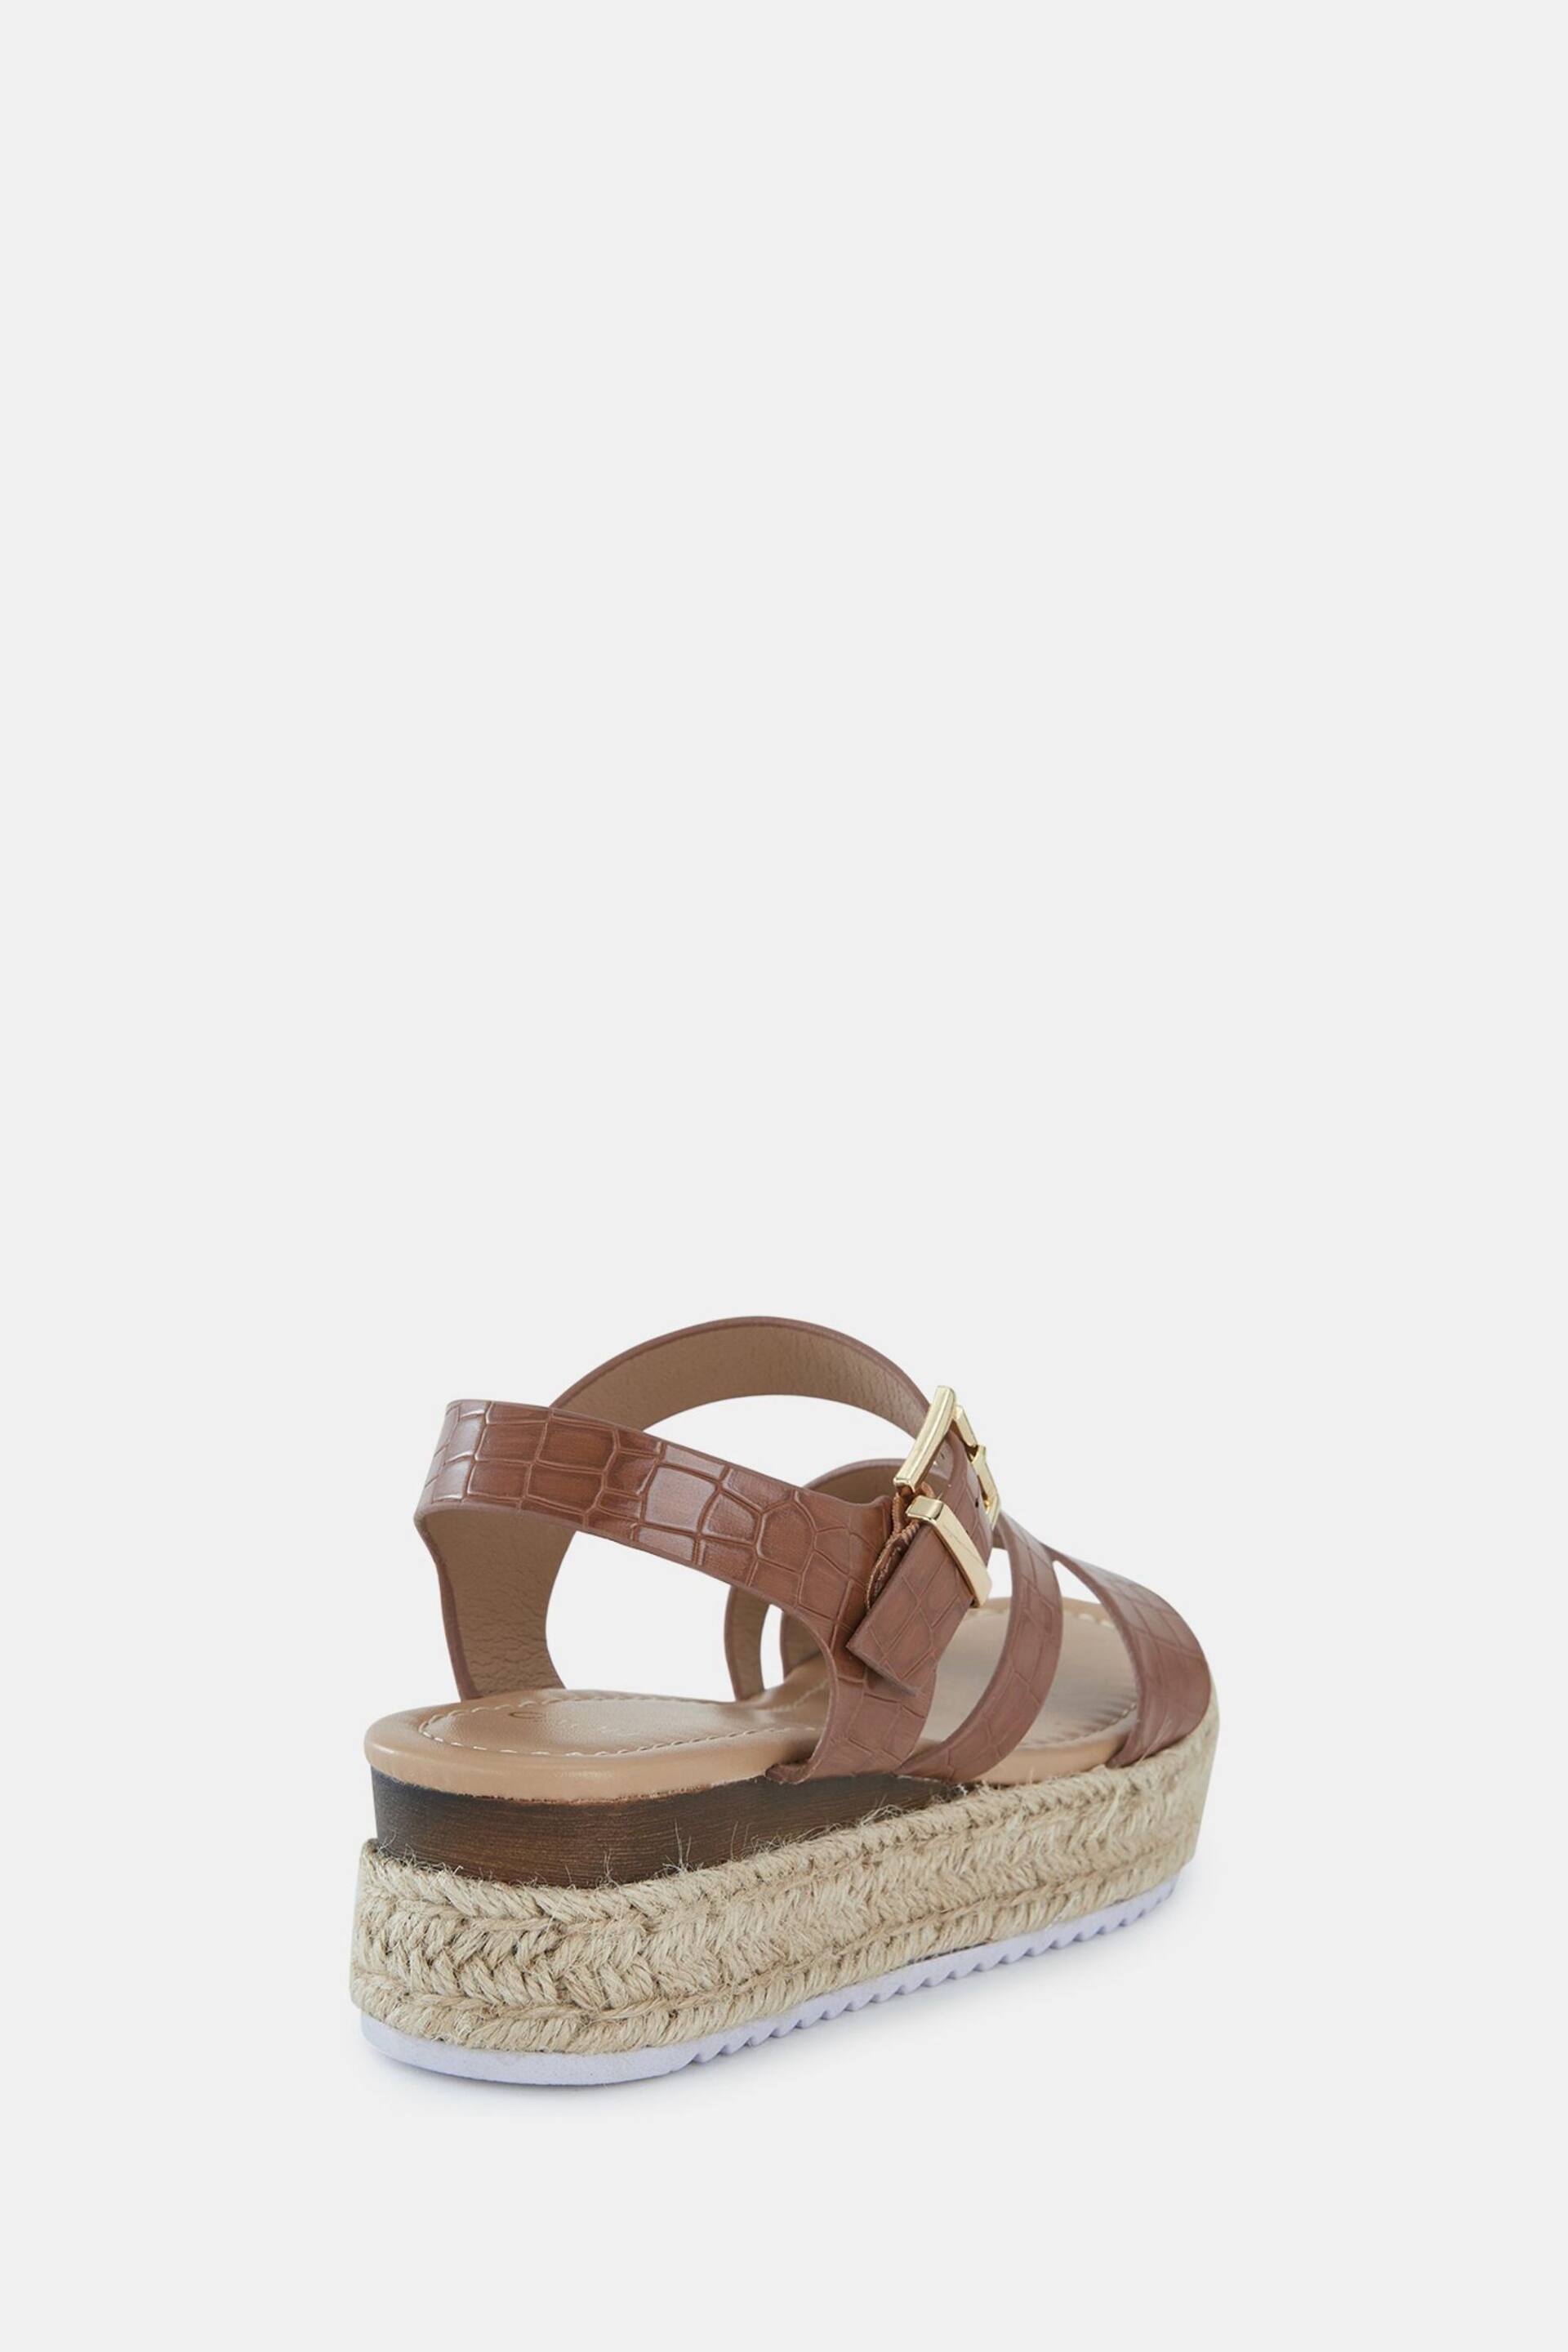 Novo Brown Regular Fit SIMBA Espadrille Strappy Sandals - Image 4 of 6